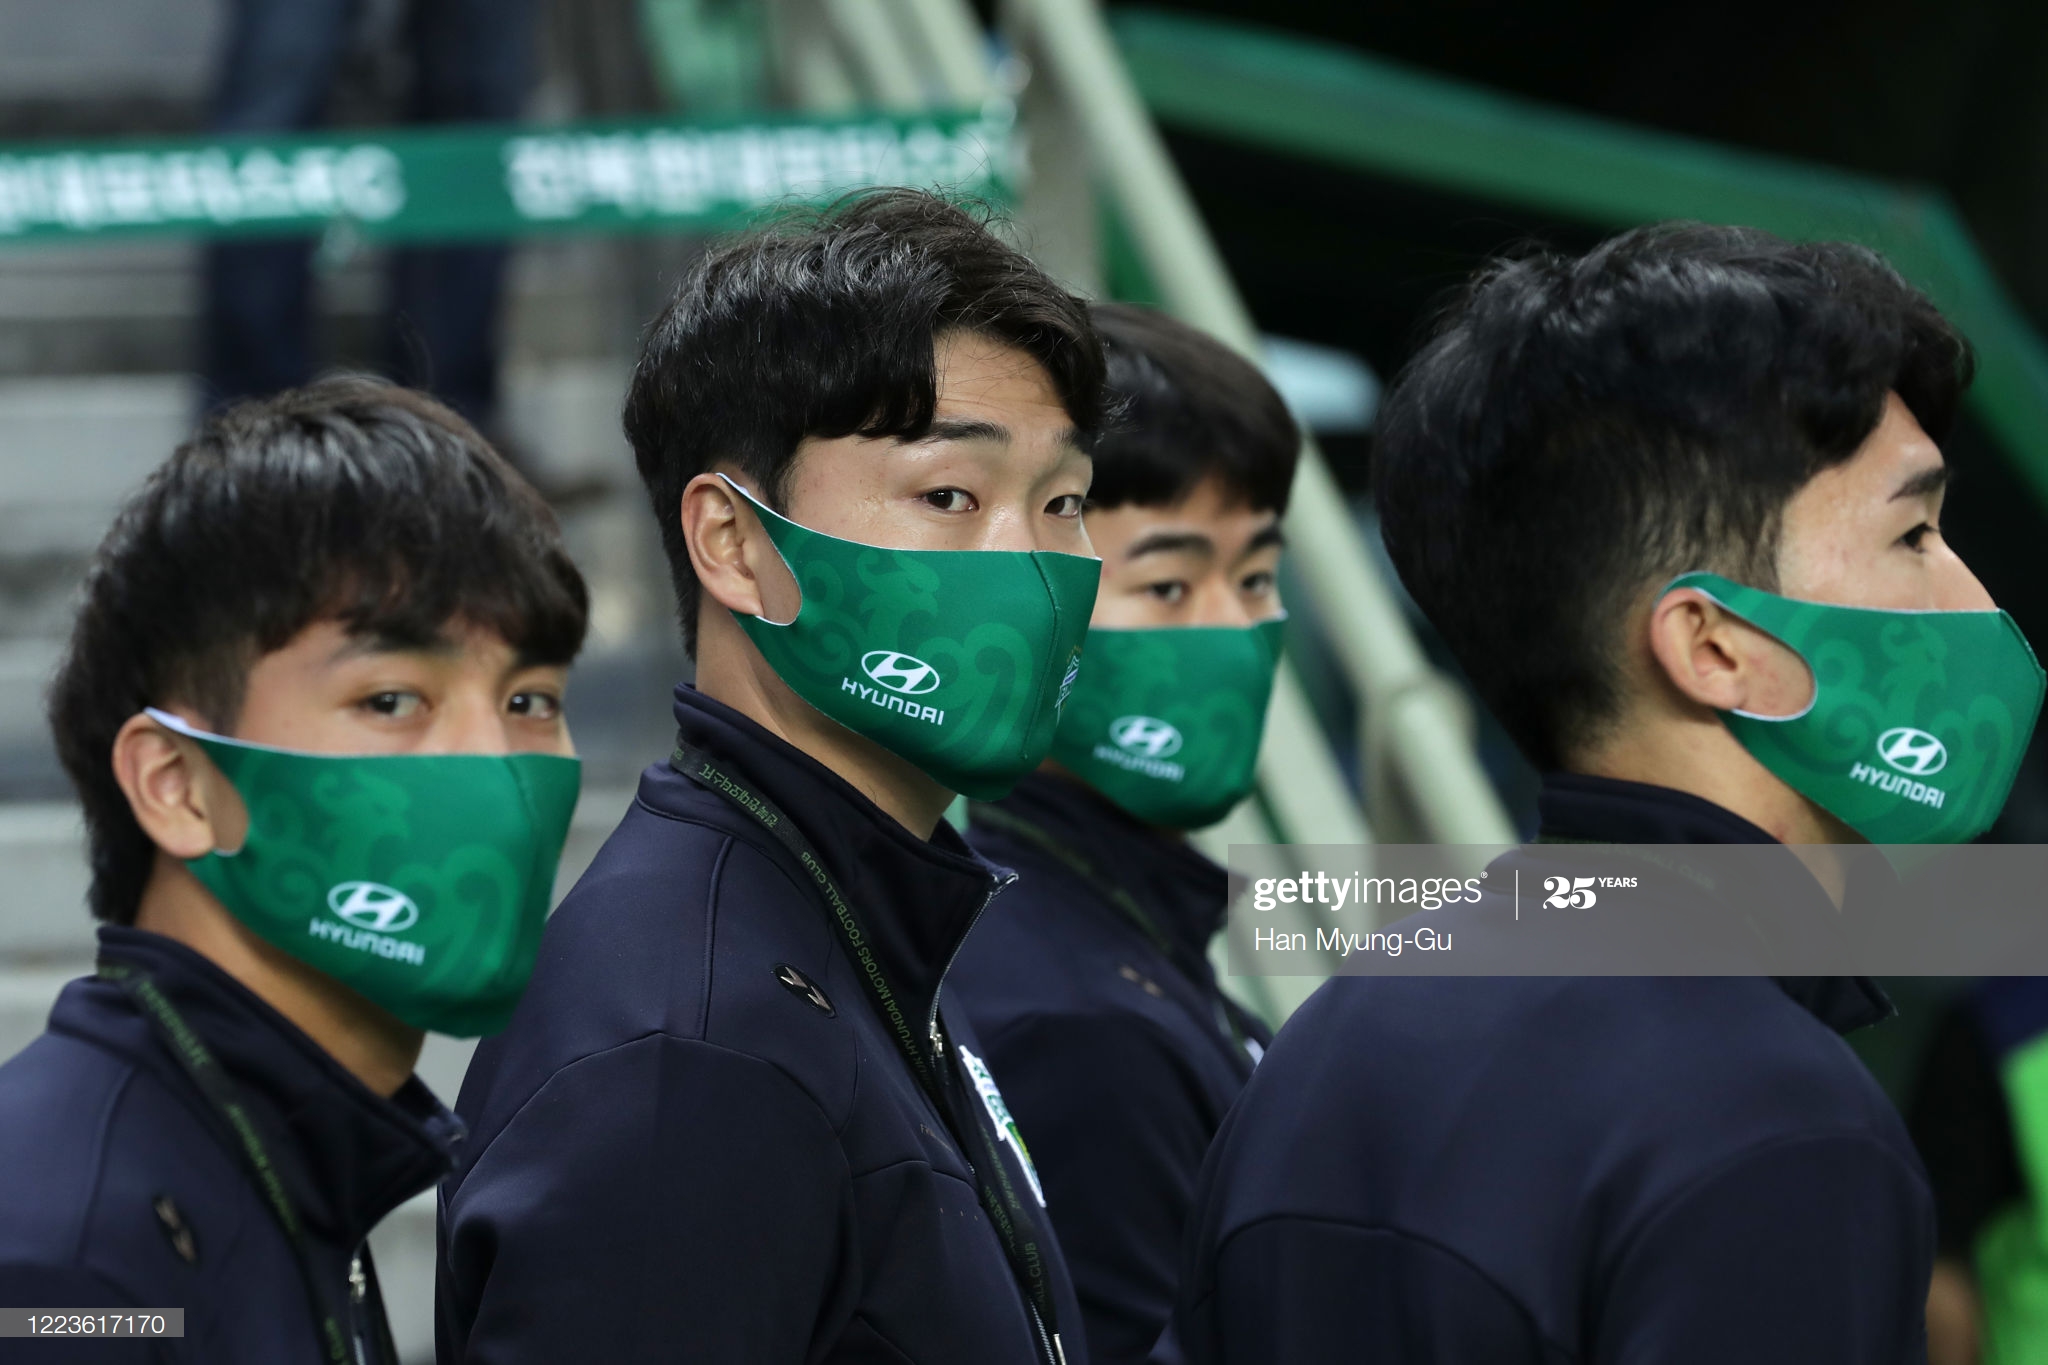 gettyimages-1223617170-2048x2048.jpg